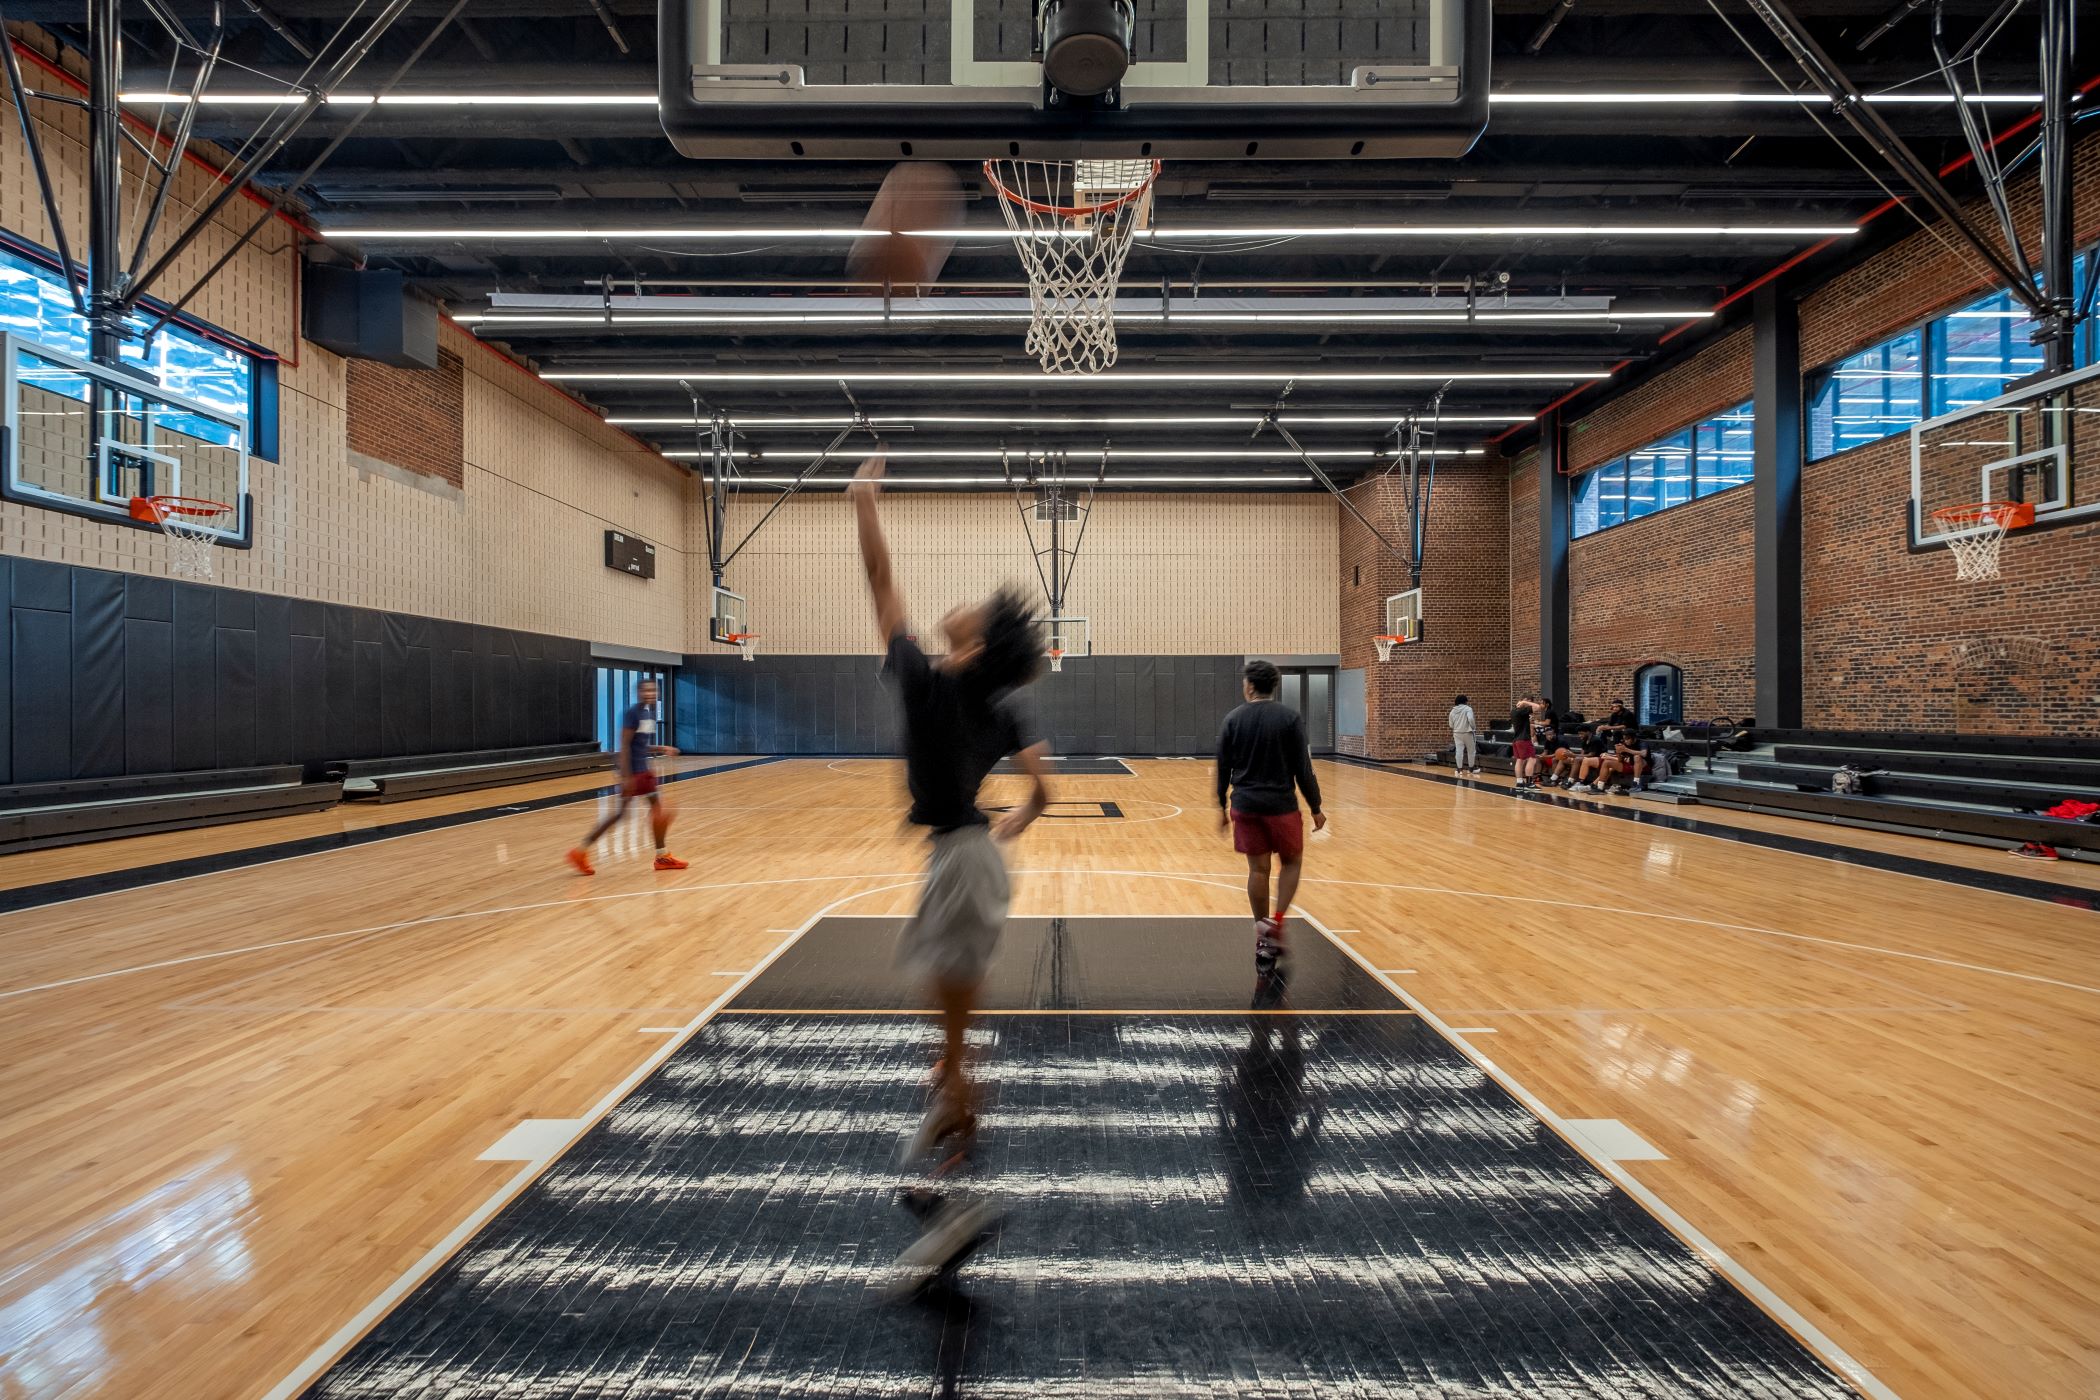 Kids playing basketball in a gymnasium